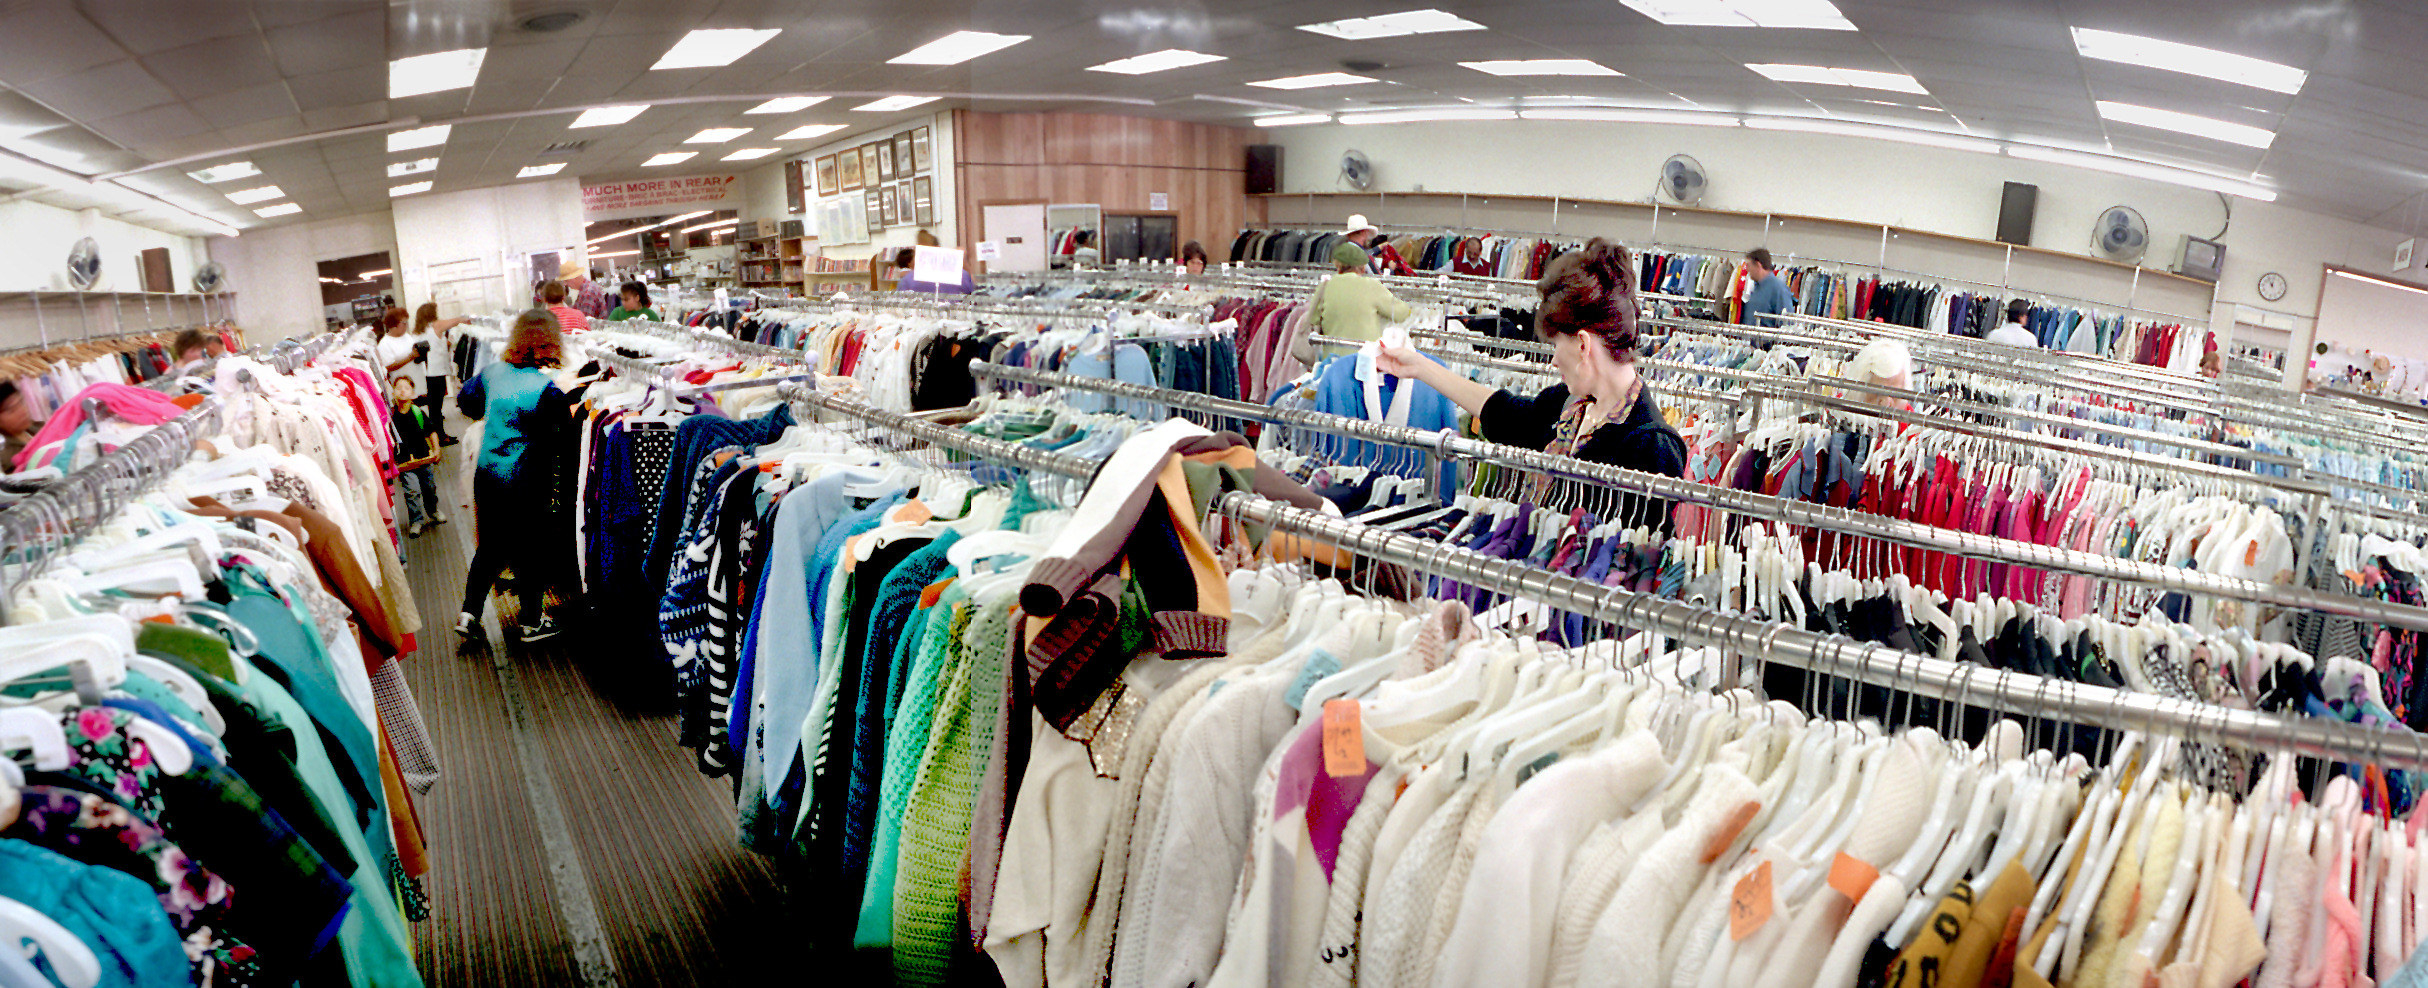 A wide-angle shot of a brightly lit thrift store in the &#x27;90s